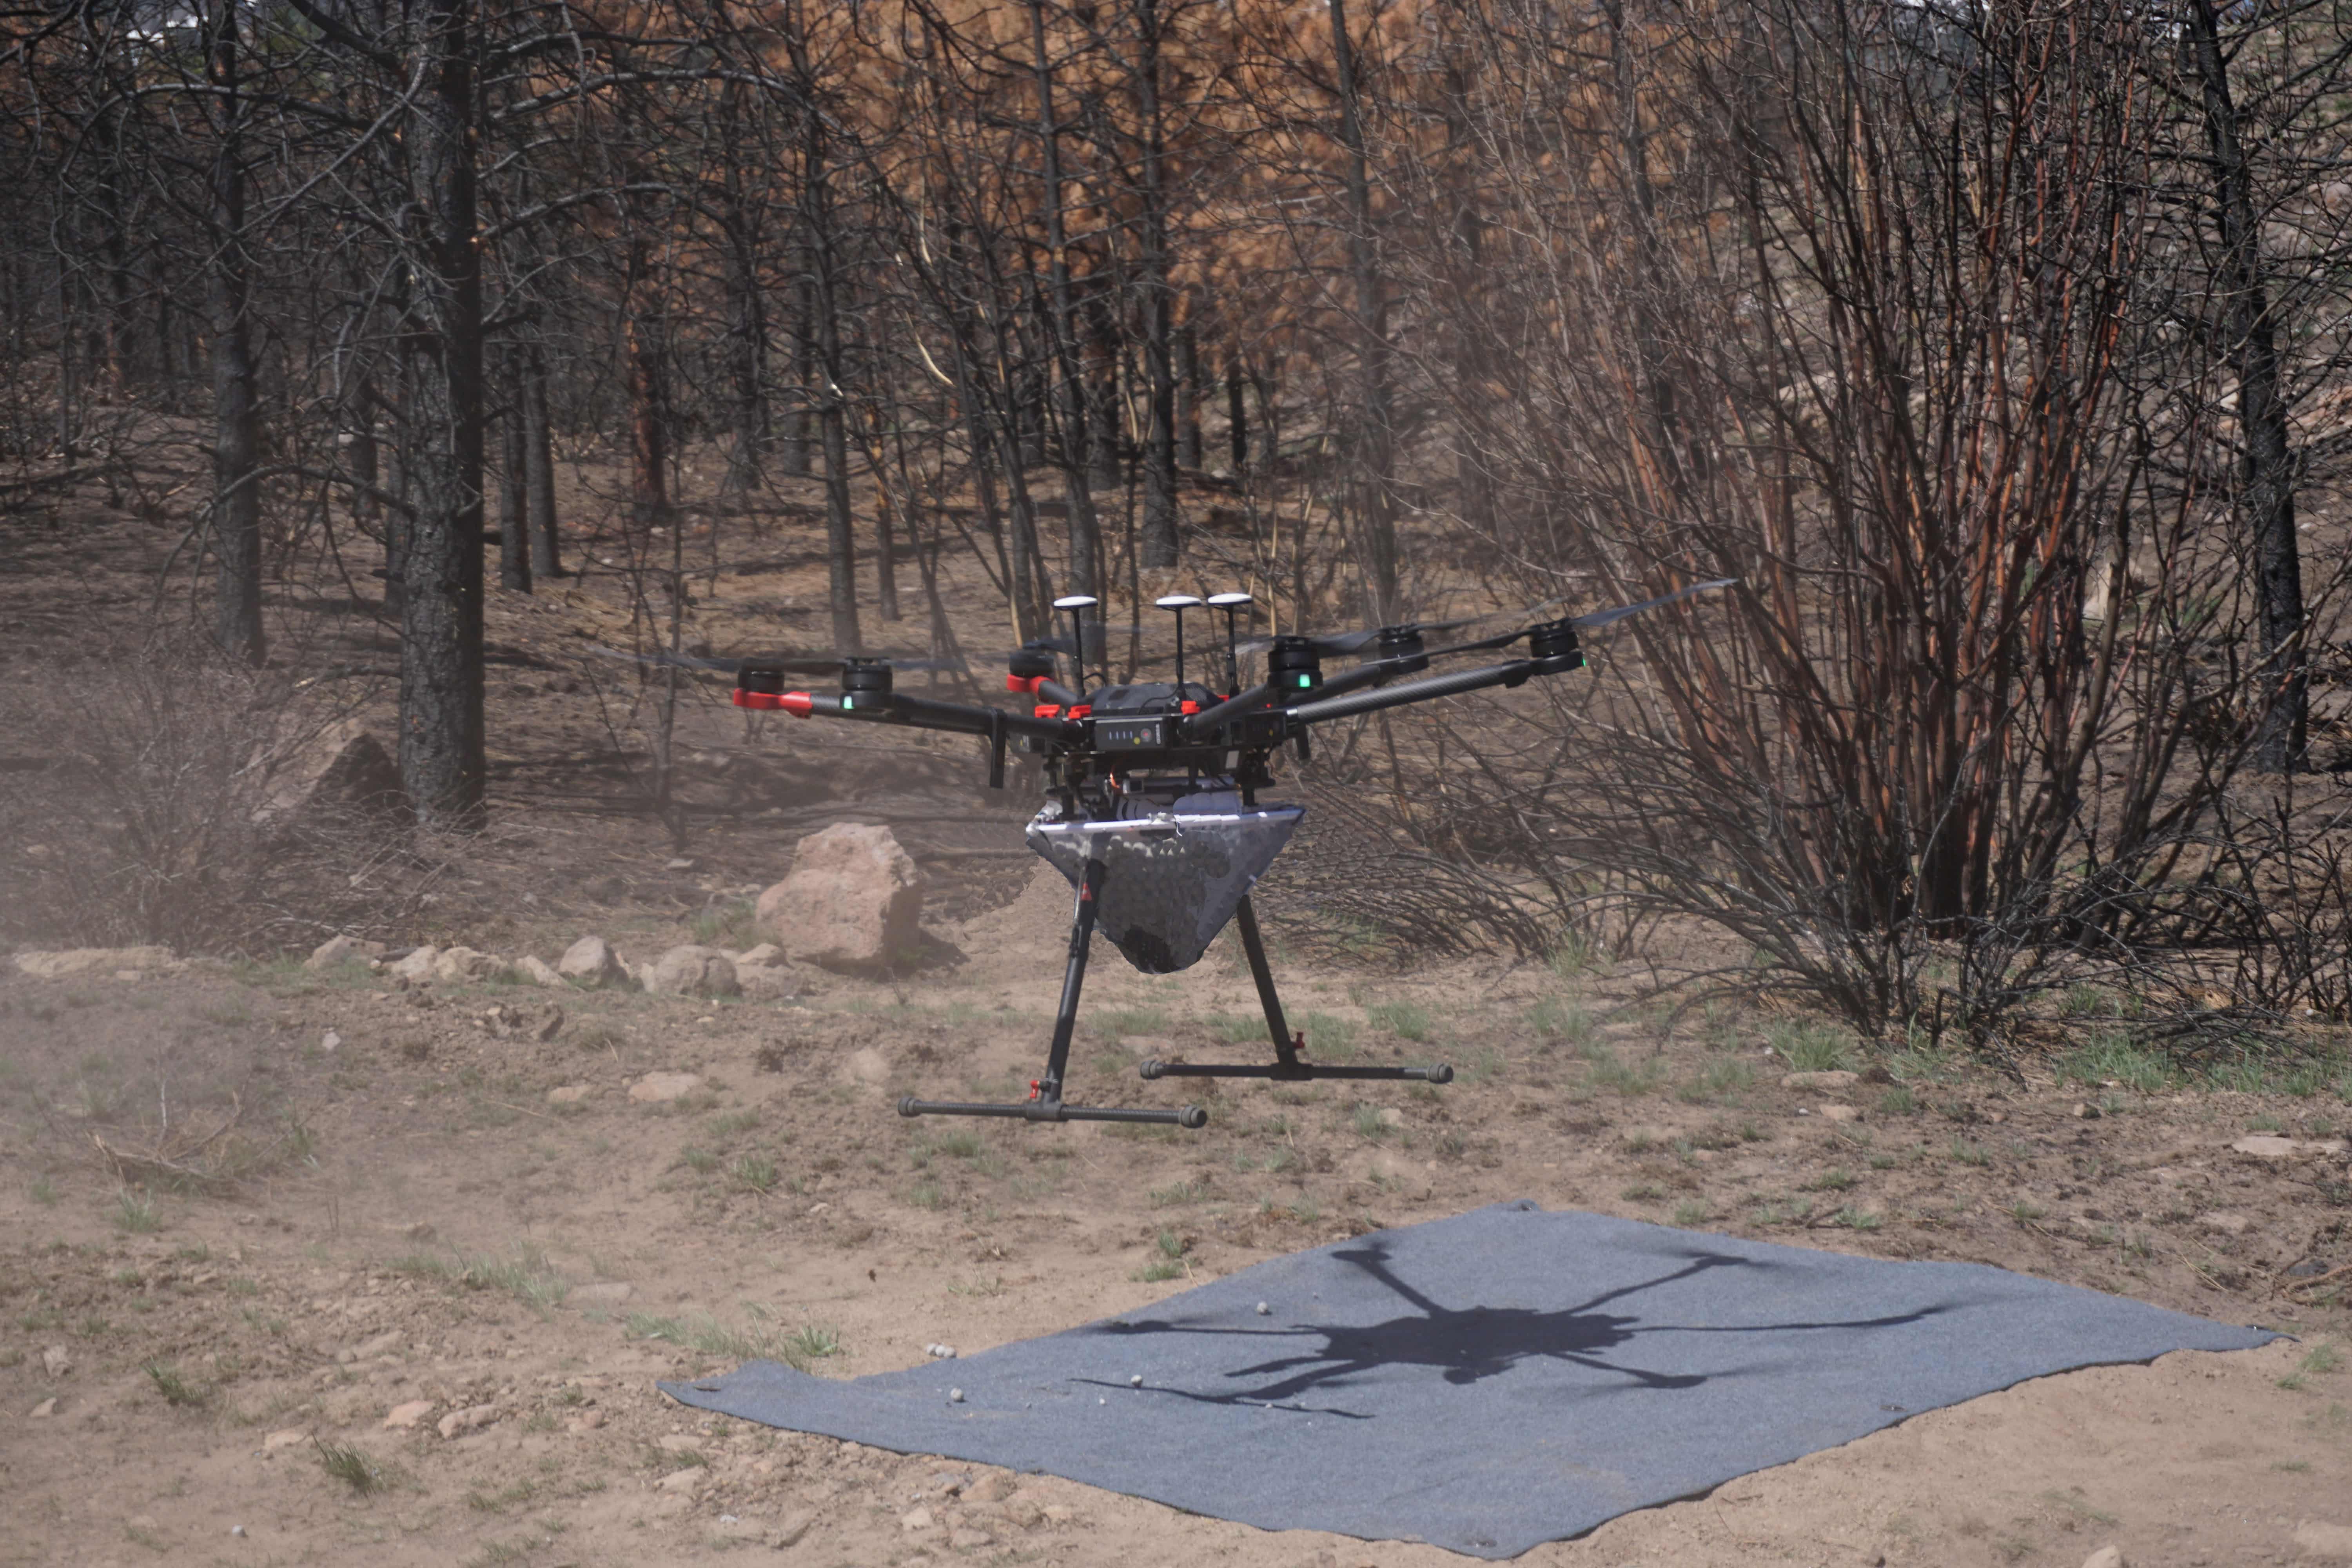 drone landing in burnt forest